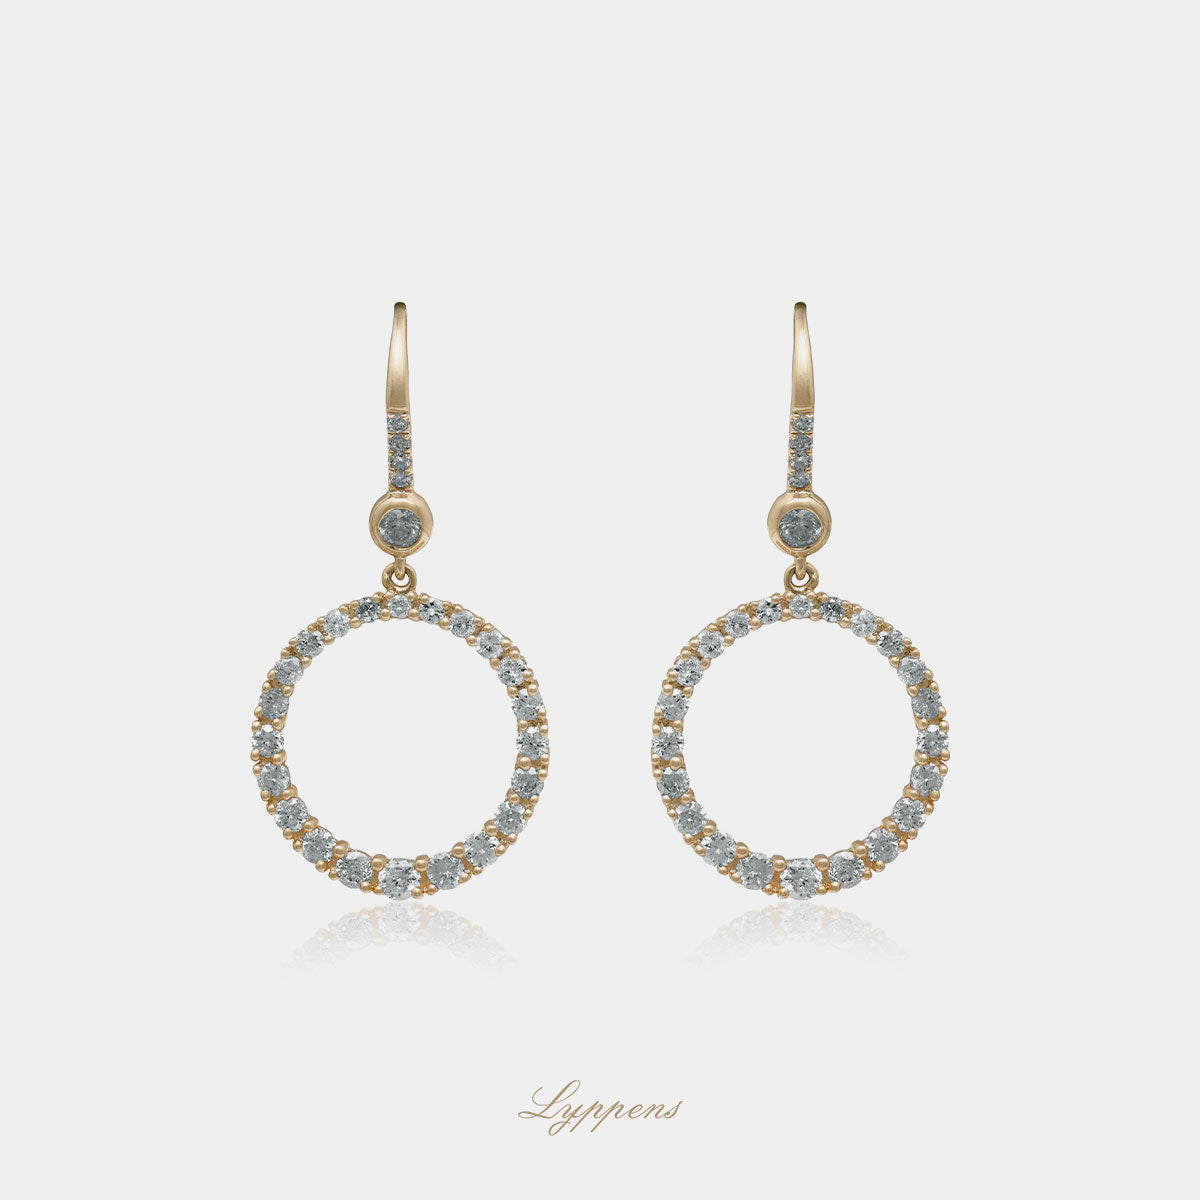 Yellow gold vintage earrings with diamonds